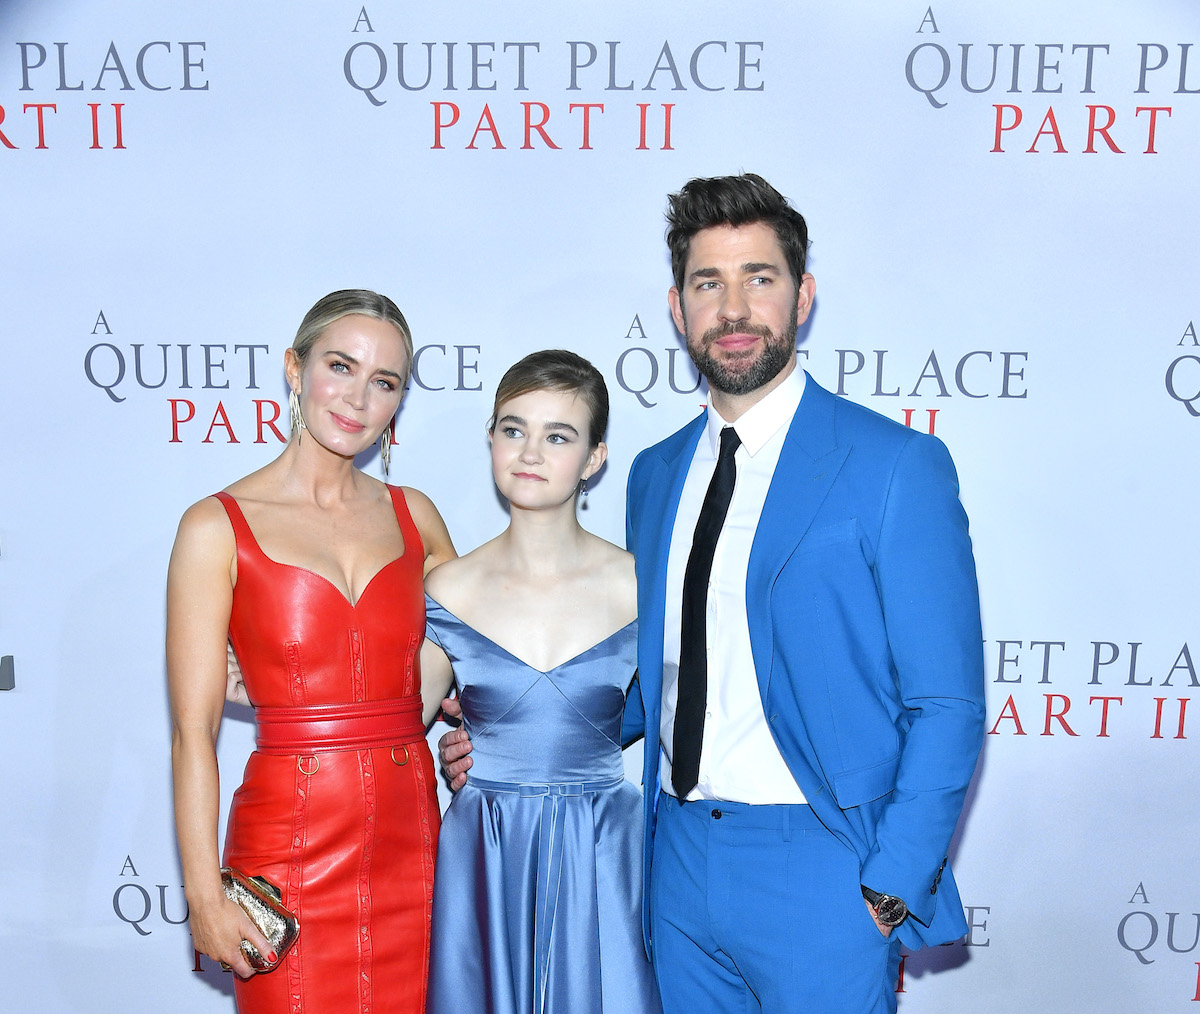 Emily Blunt, Millicent Simmonds, and John Krasinski all dressed up in front of the ‘A Quiet Place Part II’